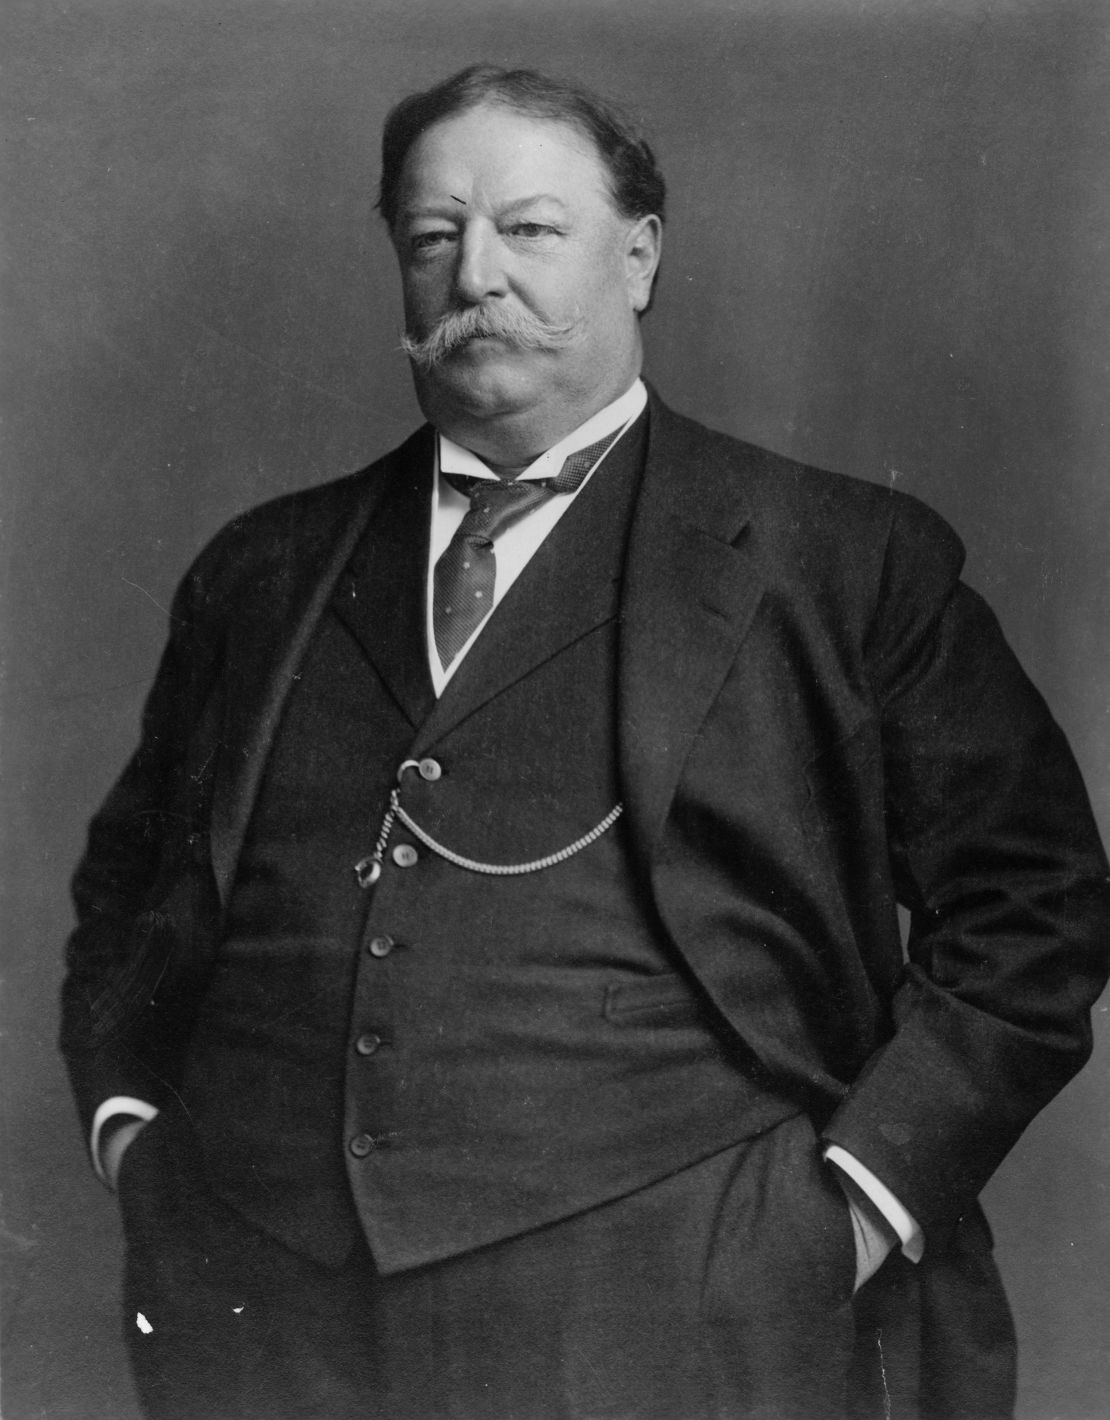 President William Howard Taft in 1910. Roosevelt chose Taft as his successor, then turned against him in 1912.